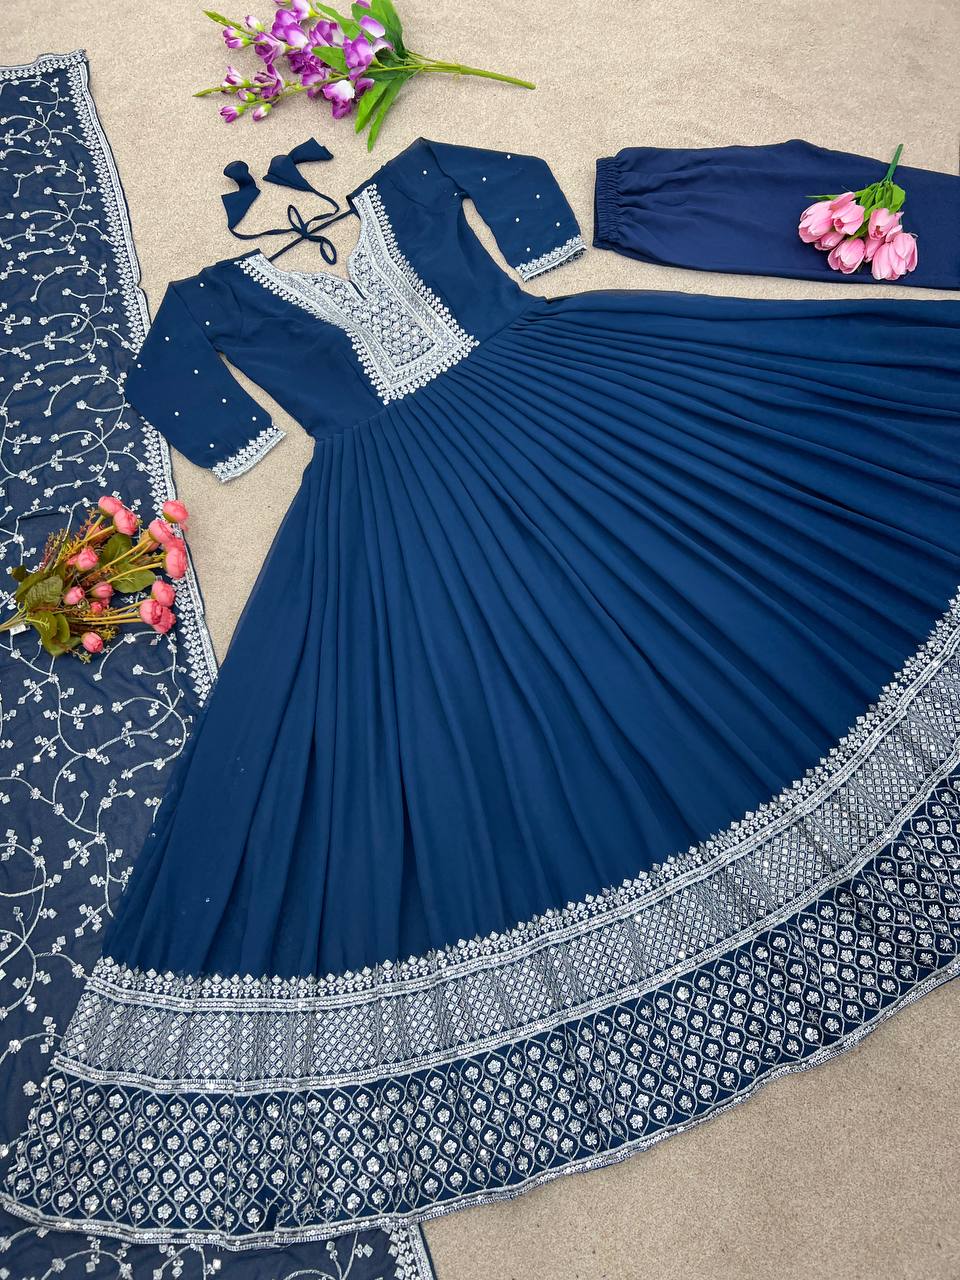 Ethnic Gowns | Blue Designer Heavy Gown For Party Wear Or Wedding Function  | Freeup